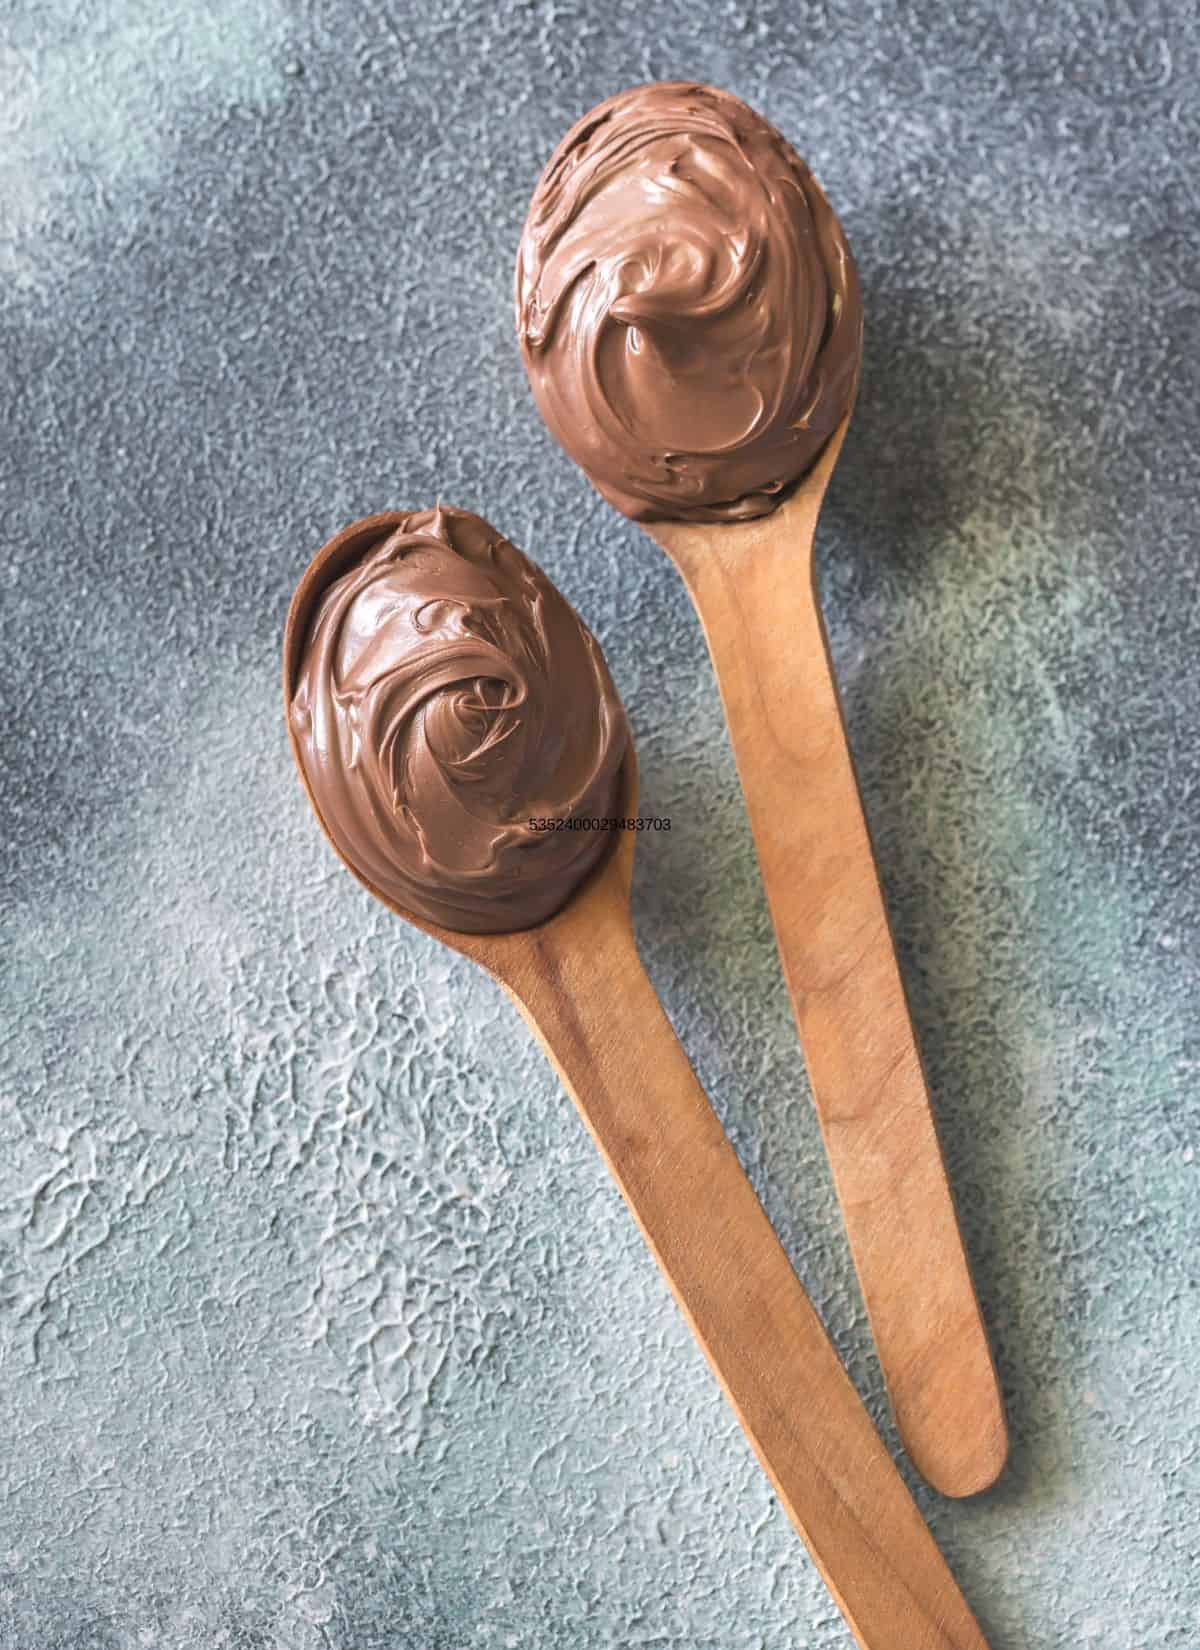 Homemade chocolate buttercreamon 2 wooden spoons.